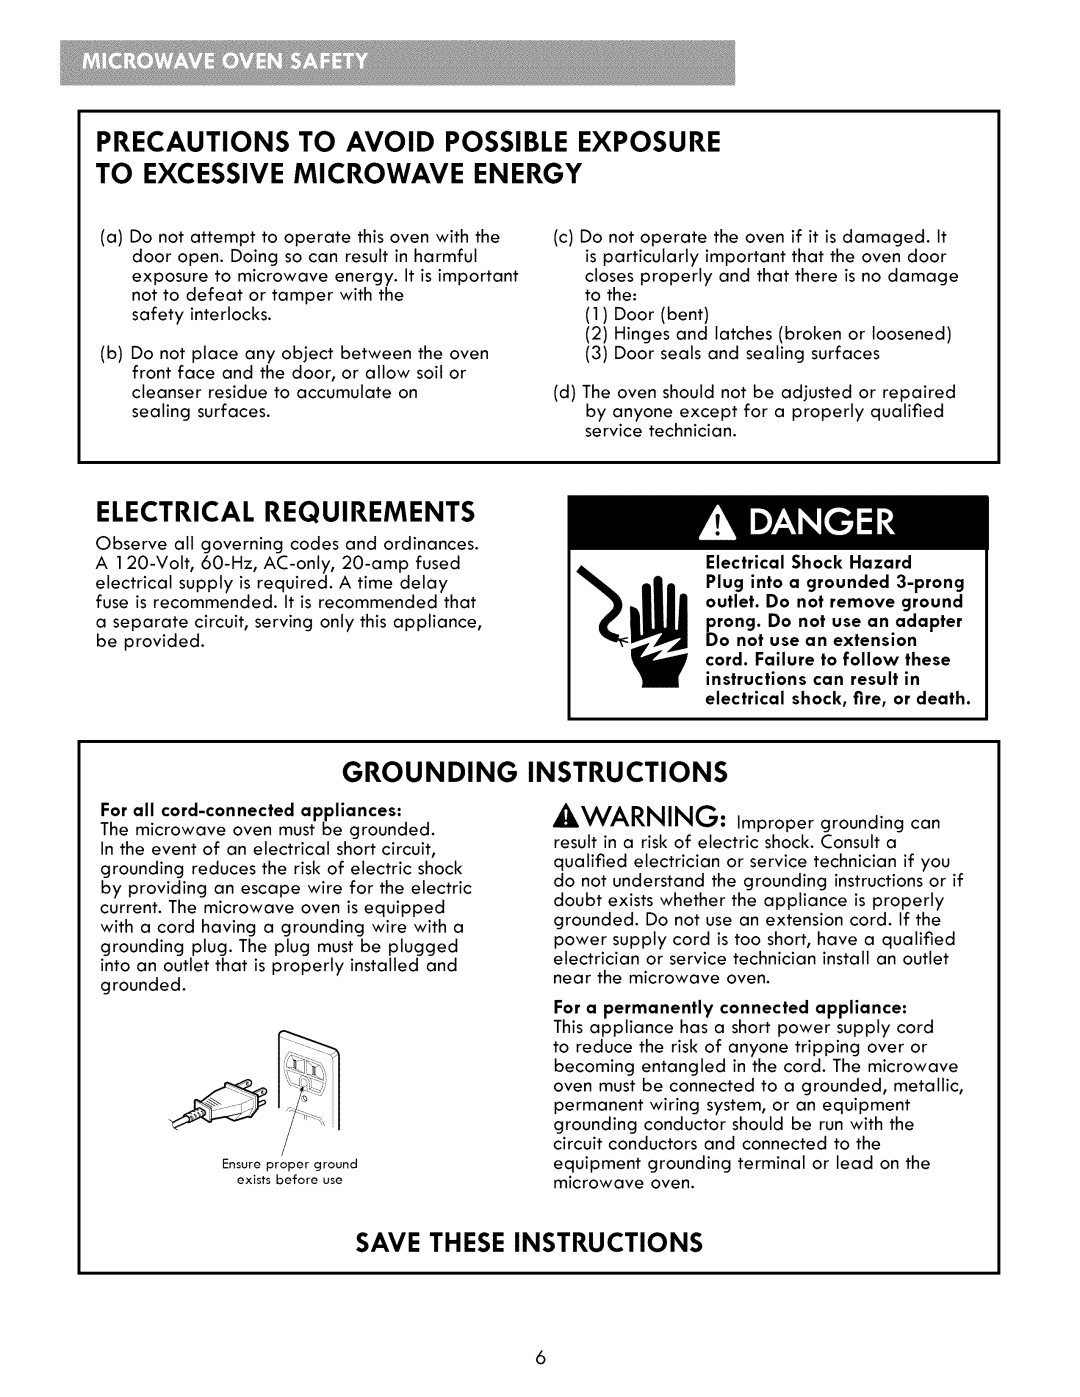 Kenmore 721.86009 manual Electrical Requirements, Grounding Instructions, Save These Instructions, Electrical Shock Hazard 